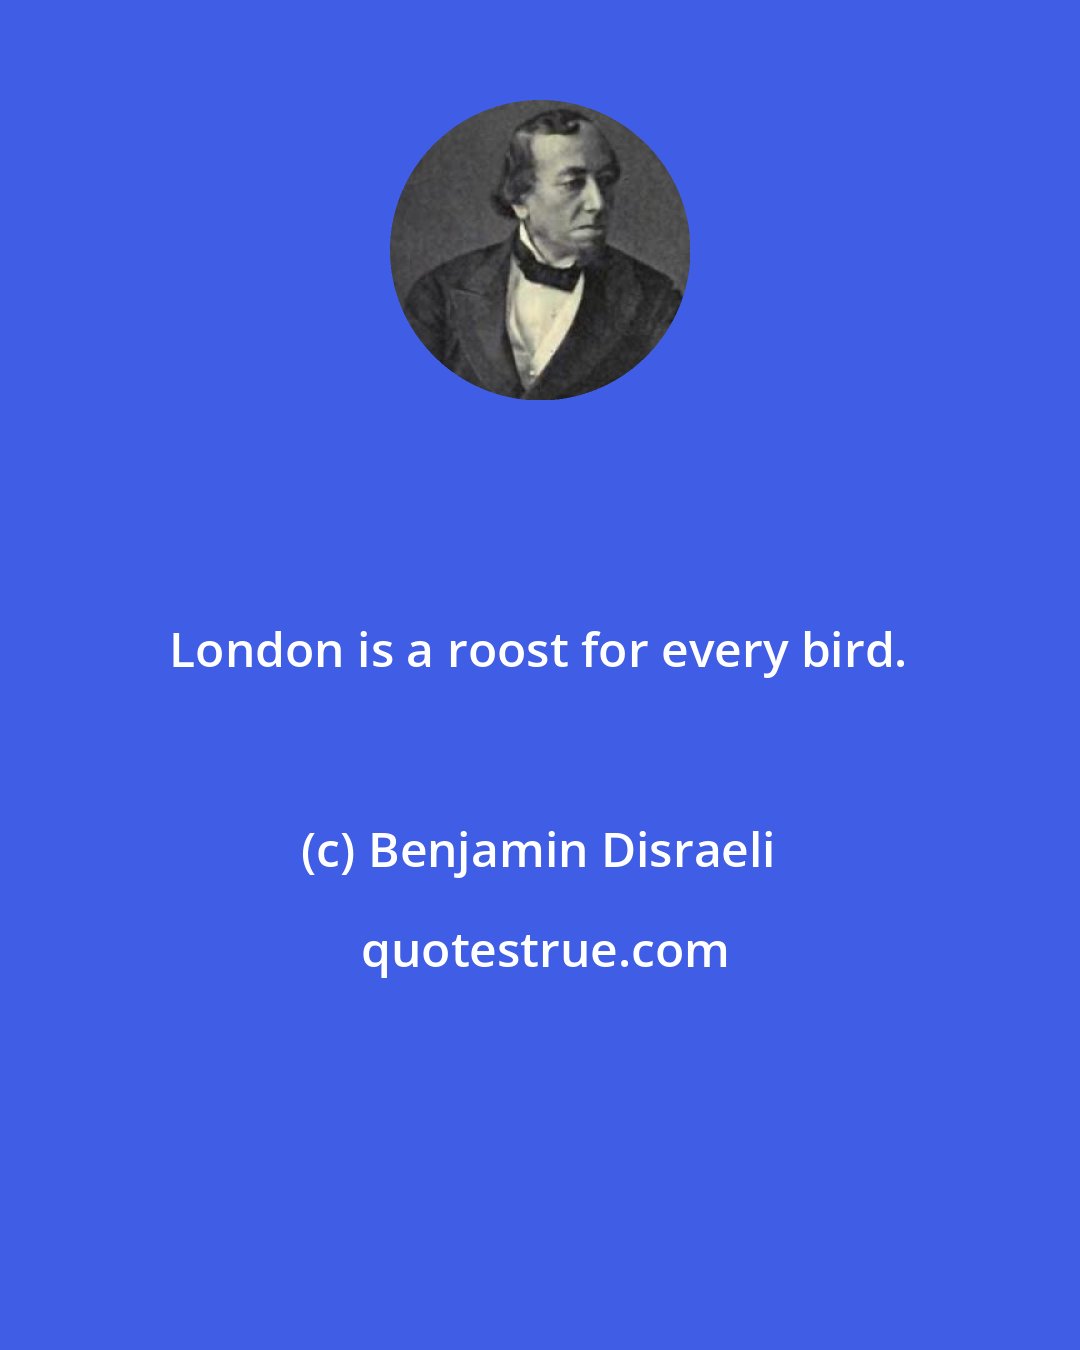 Benjamin Disraeli: London is a roost for every bird.